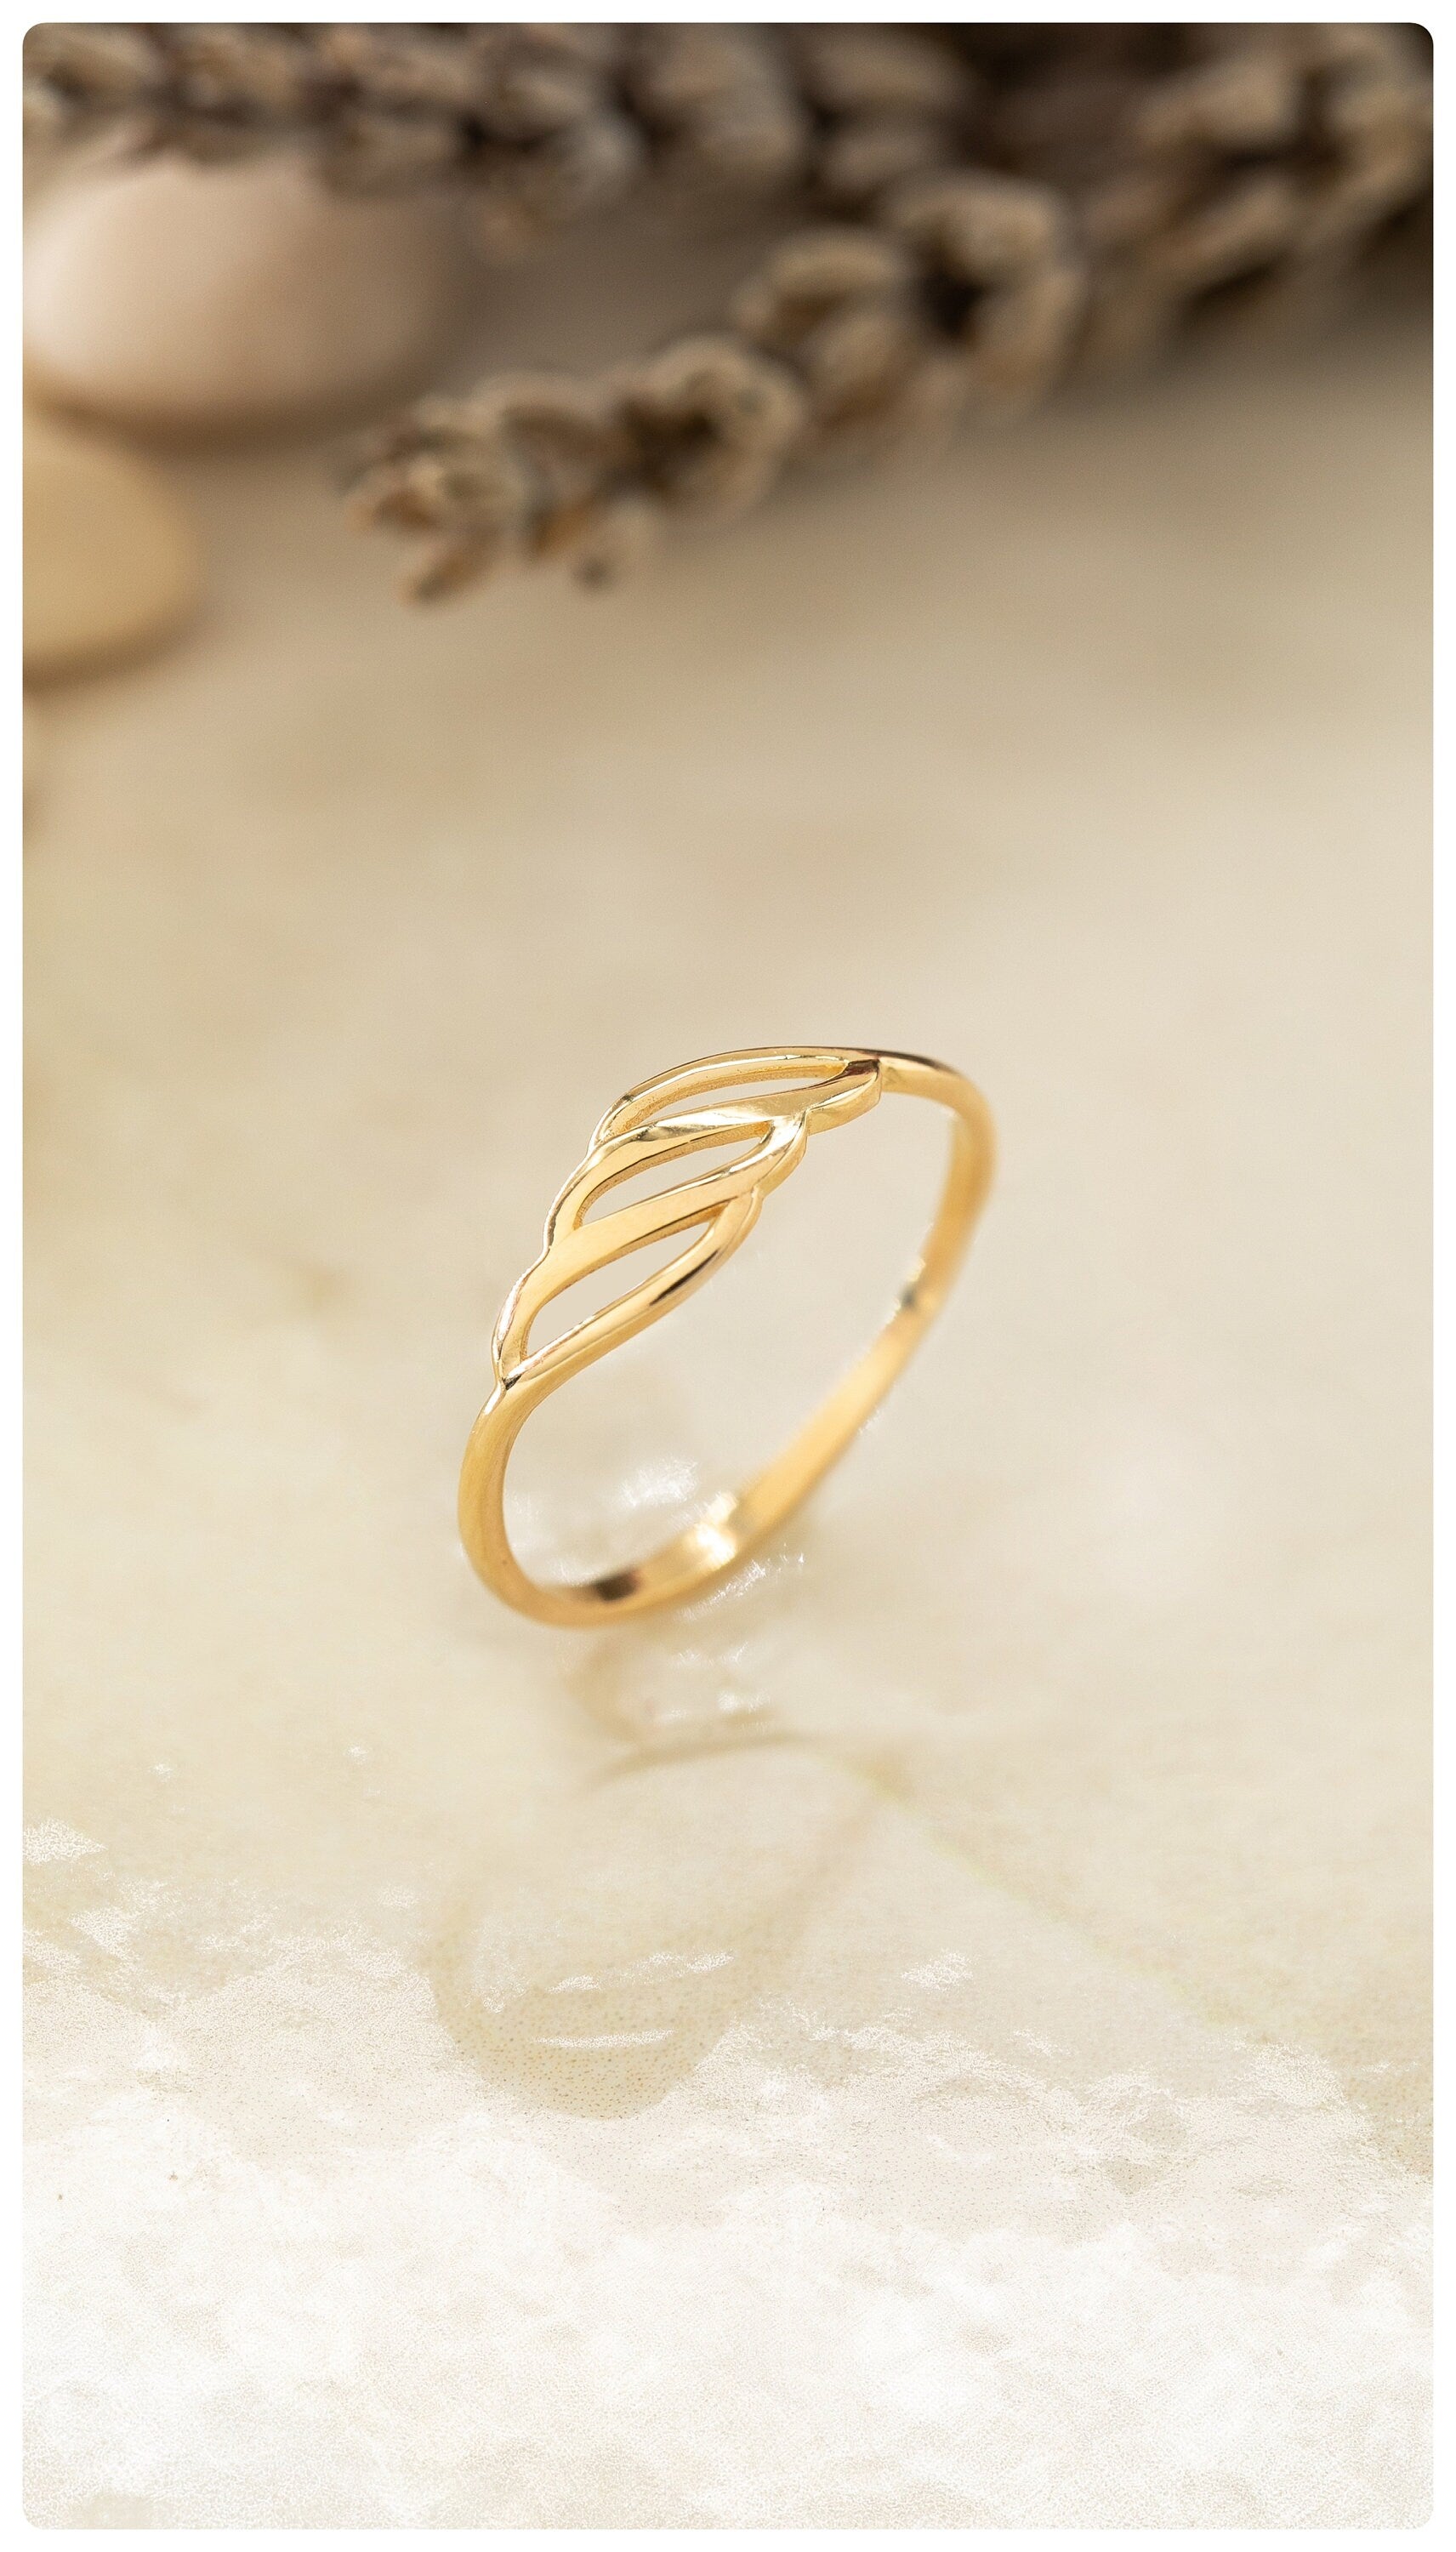 14k Solid Gold Modern Ring Design, Geometric Jewelry, Modern Statement Ring, 925 Sterling Silver Chic and Fashionable Modern Ring, Gift Idea